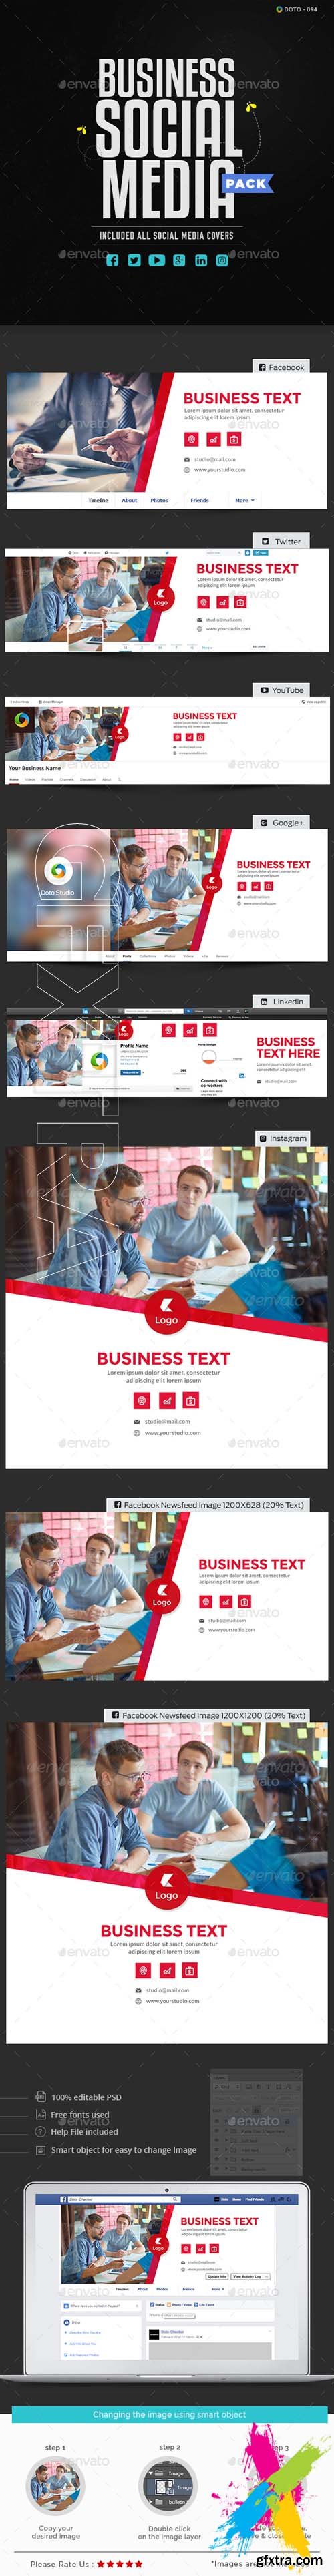 Graphicriver - Business Social Media Pack 20267187